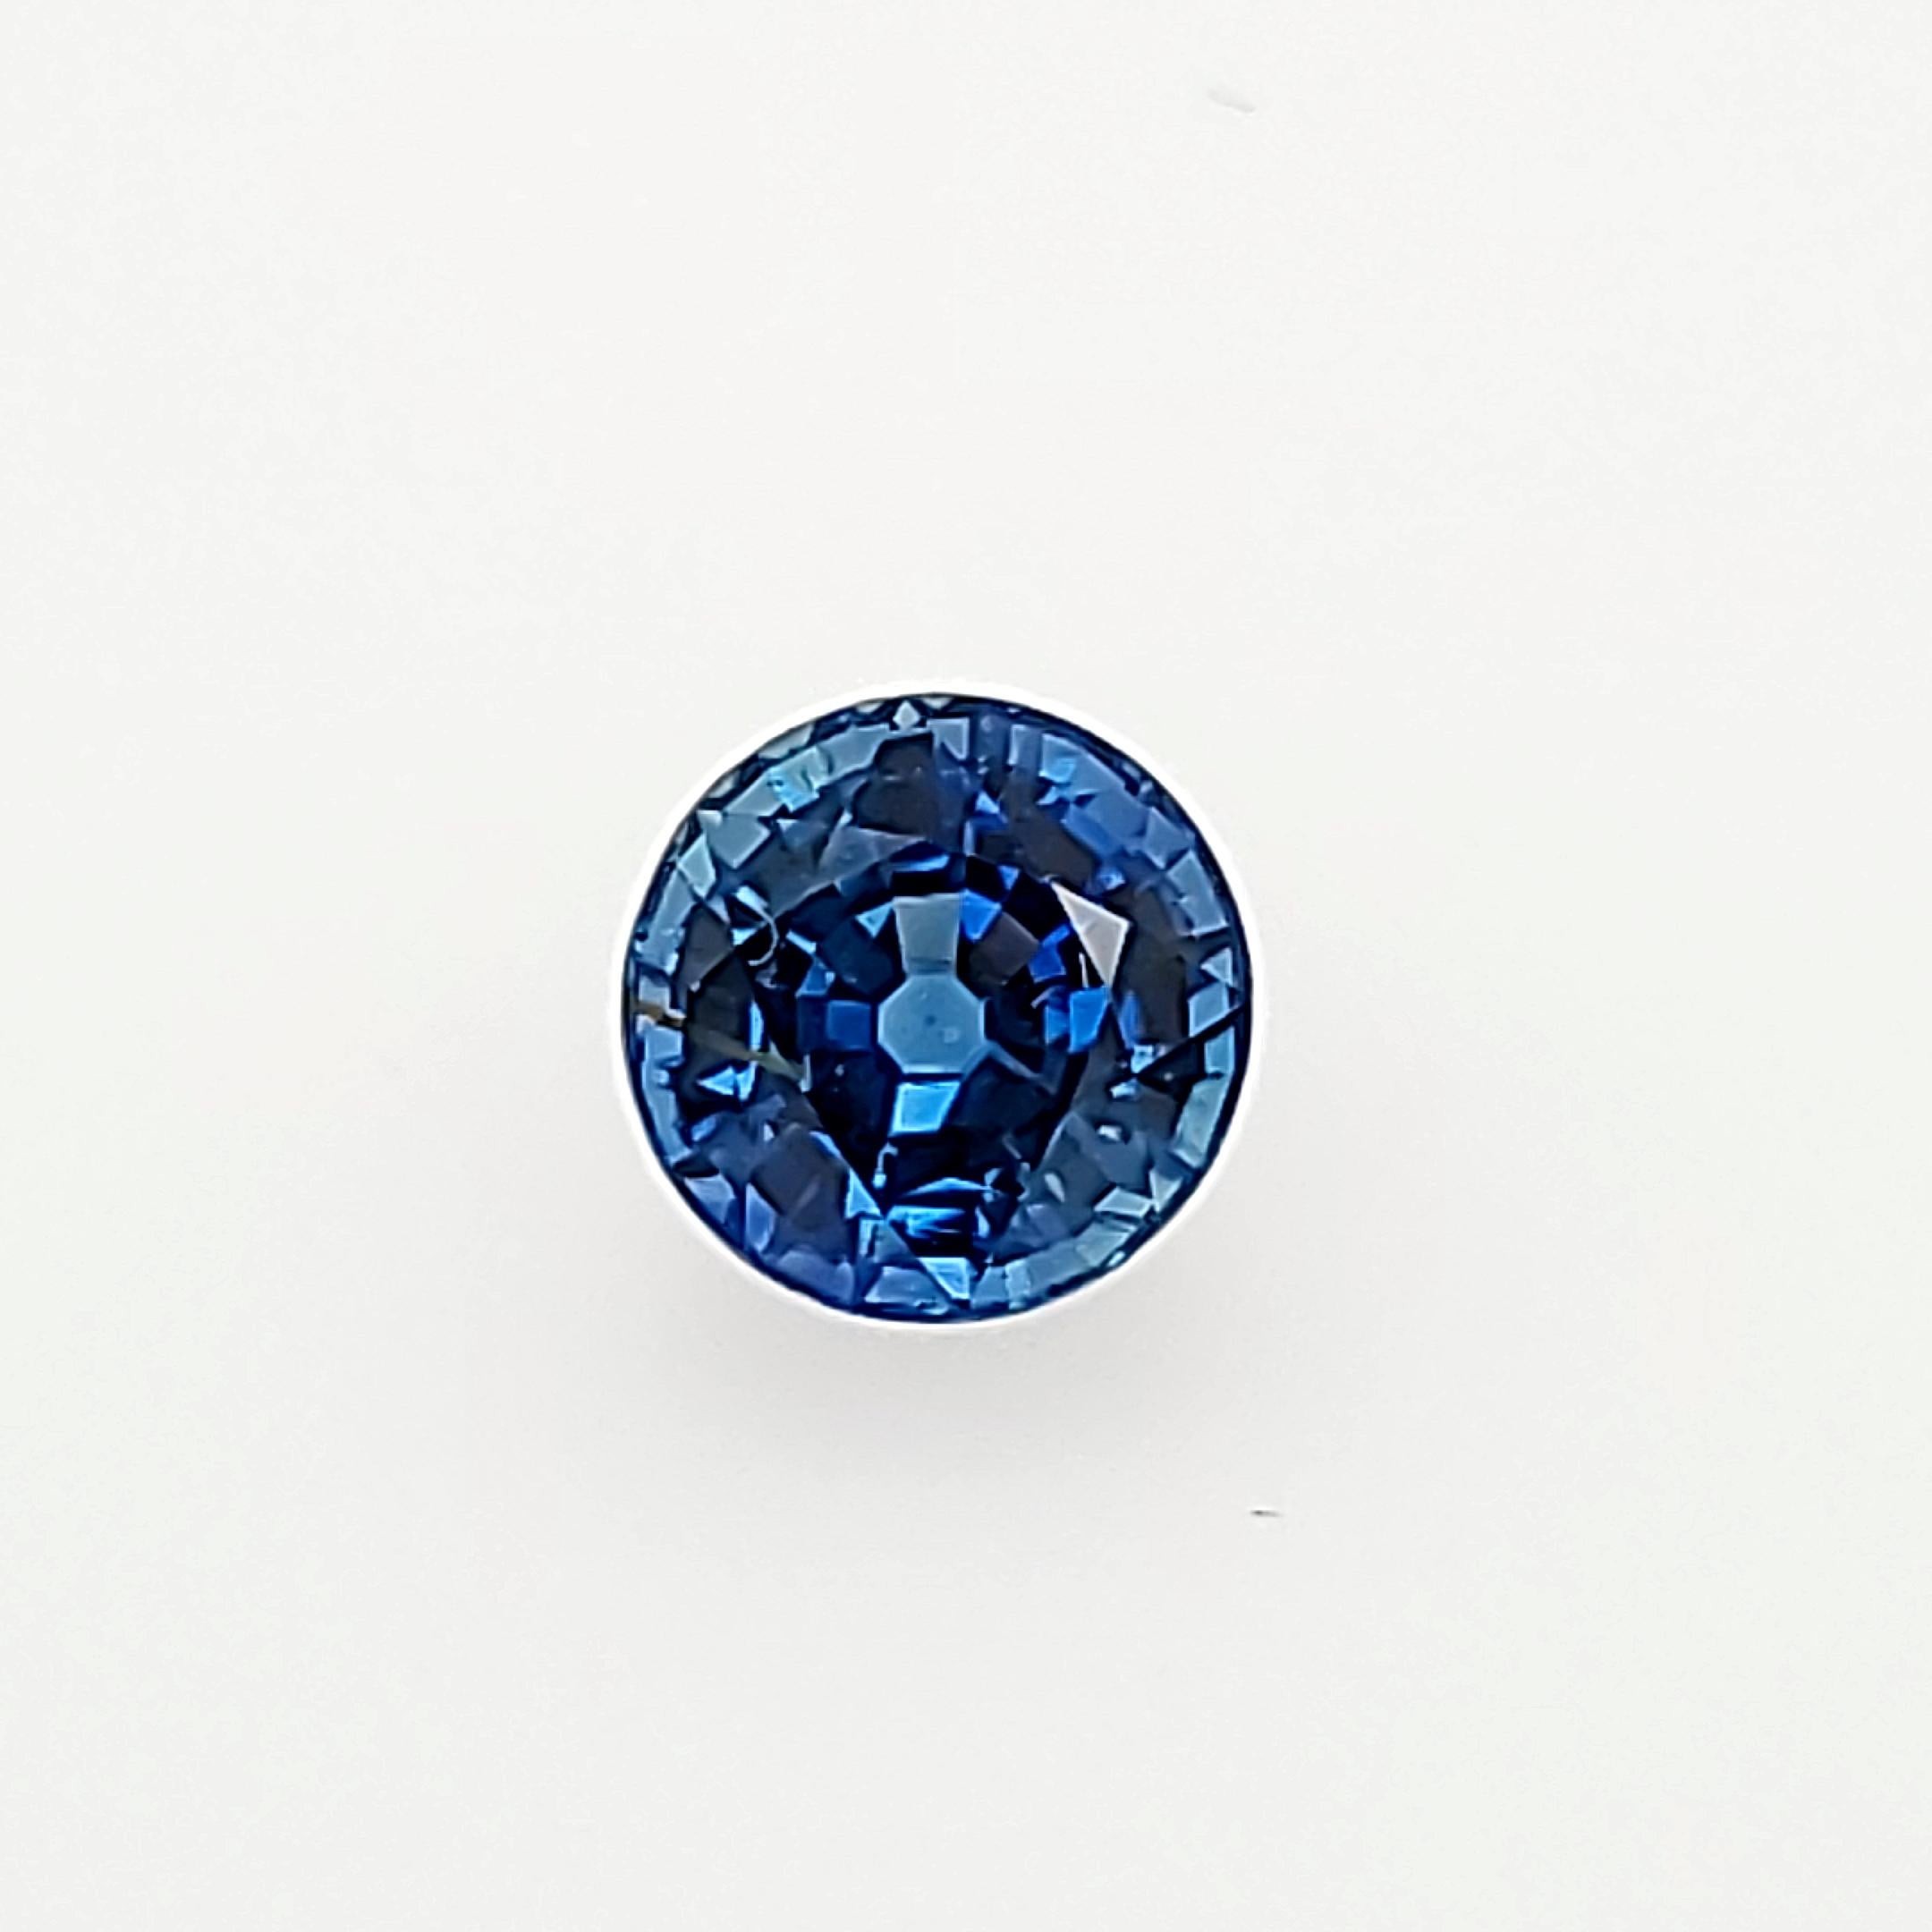 Deep Blue 2.60ct Round Sapphire from Thailand, most likely from the famous mining area of Chantaburi/Trat. Larger Rounds are not common in Sapphire due to the shape of the crystal.  This is most likely heated, as most Sapphire, Ruby, Aquamarine,